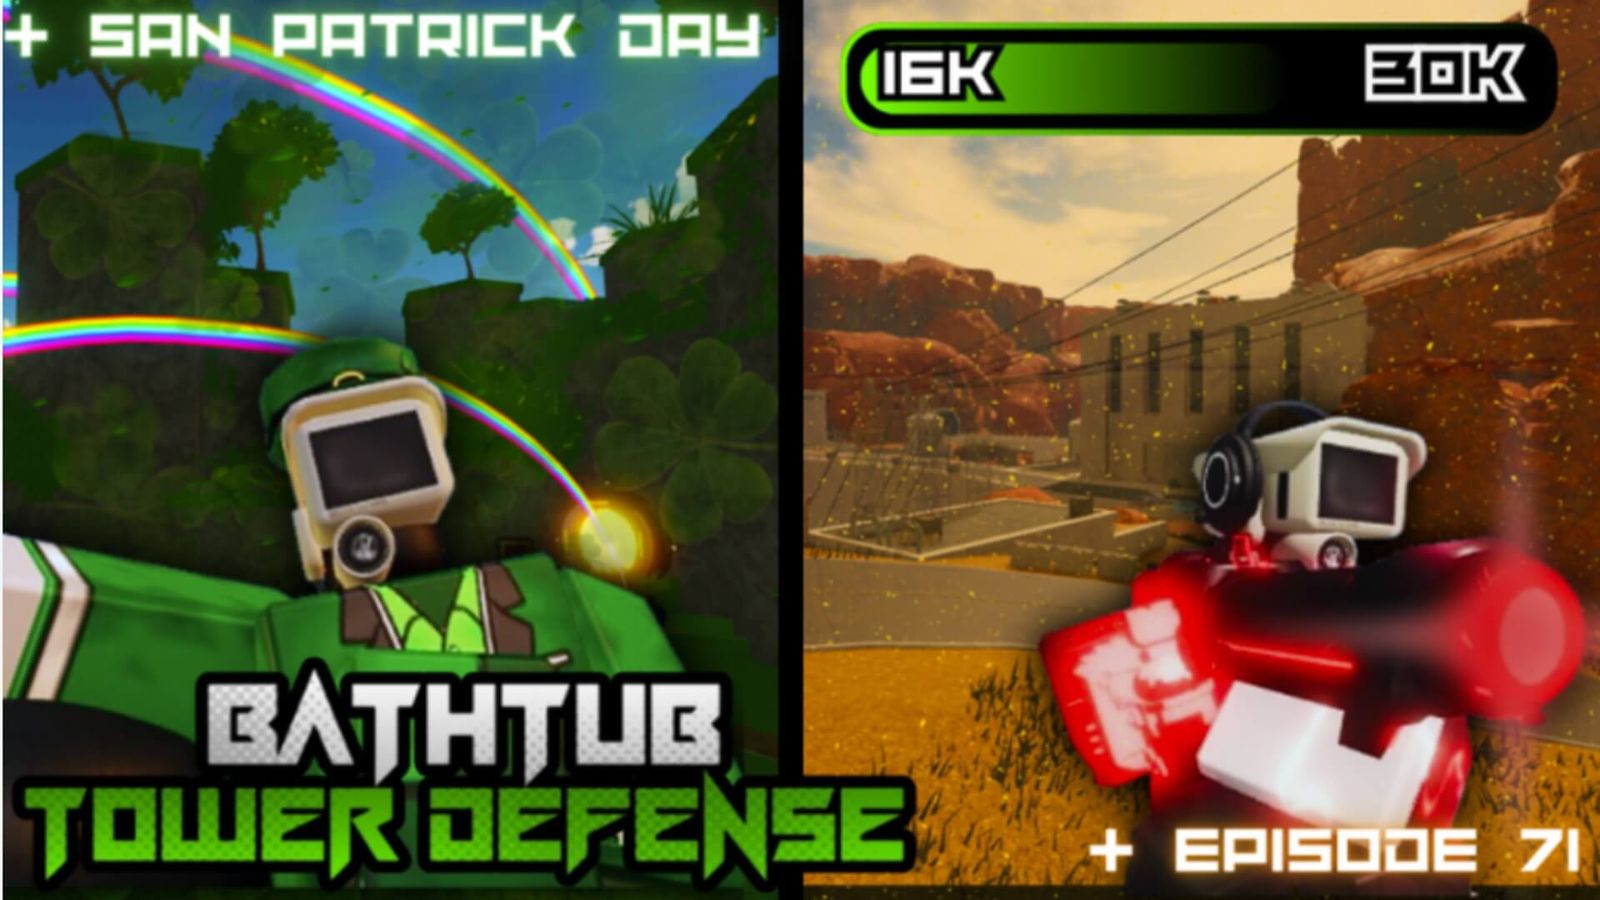 Bathtub Tower Defense poster featuring two roblox robot character